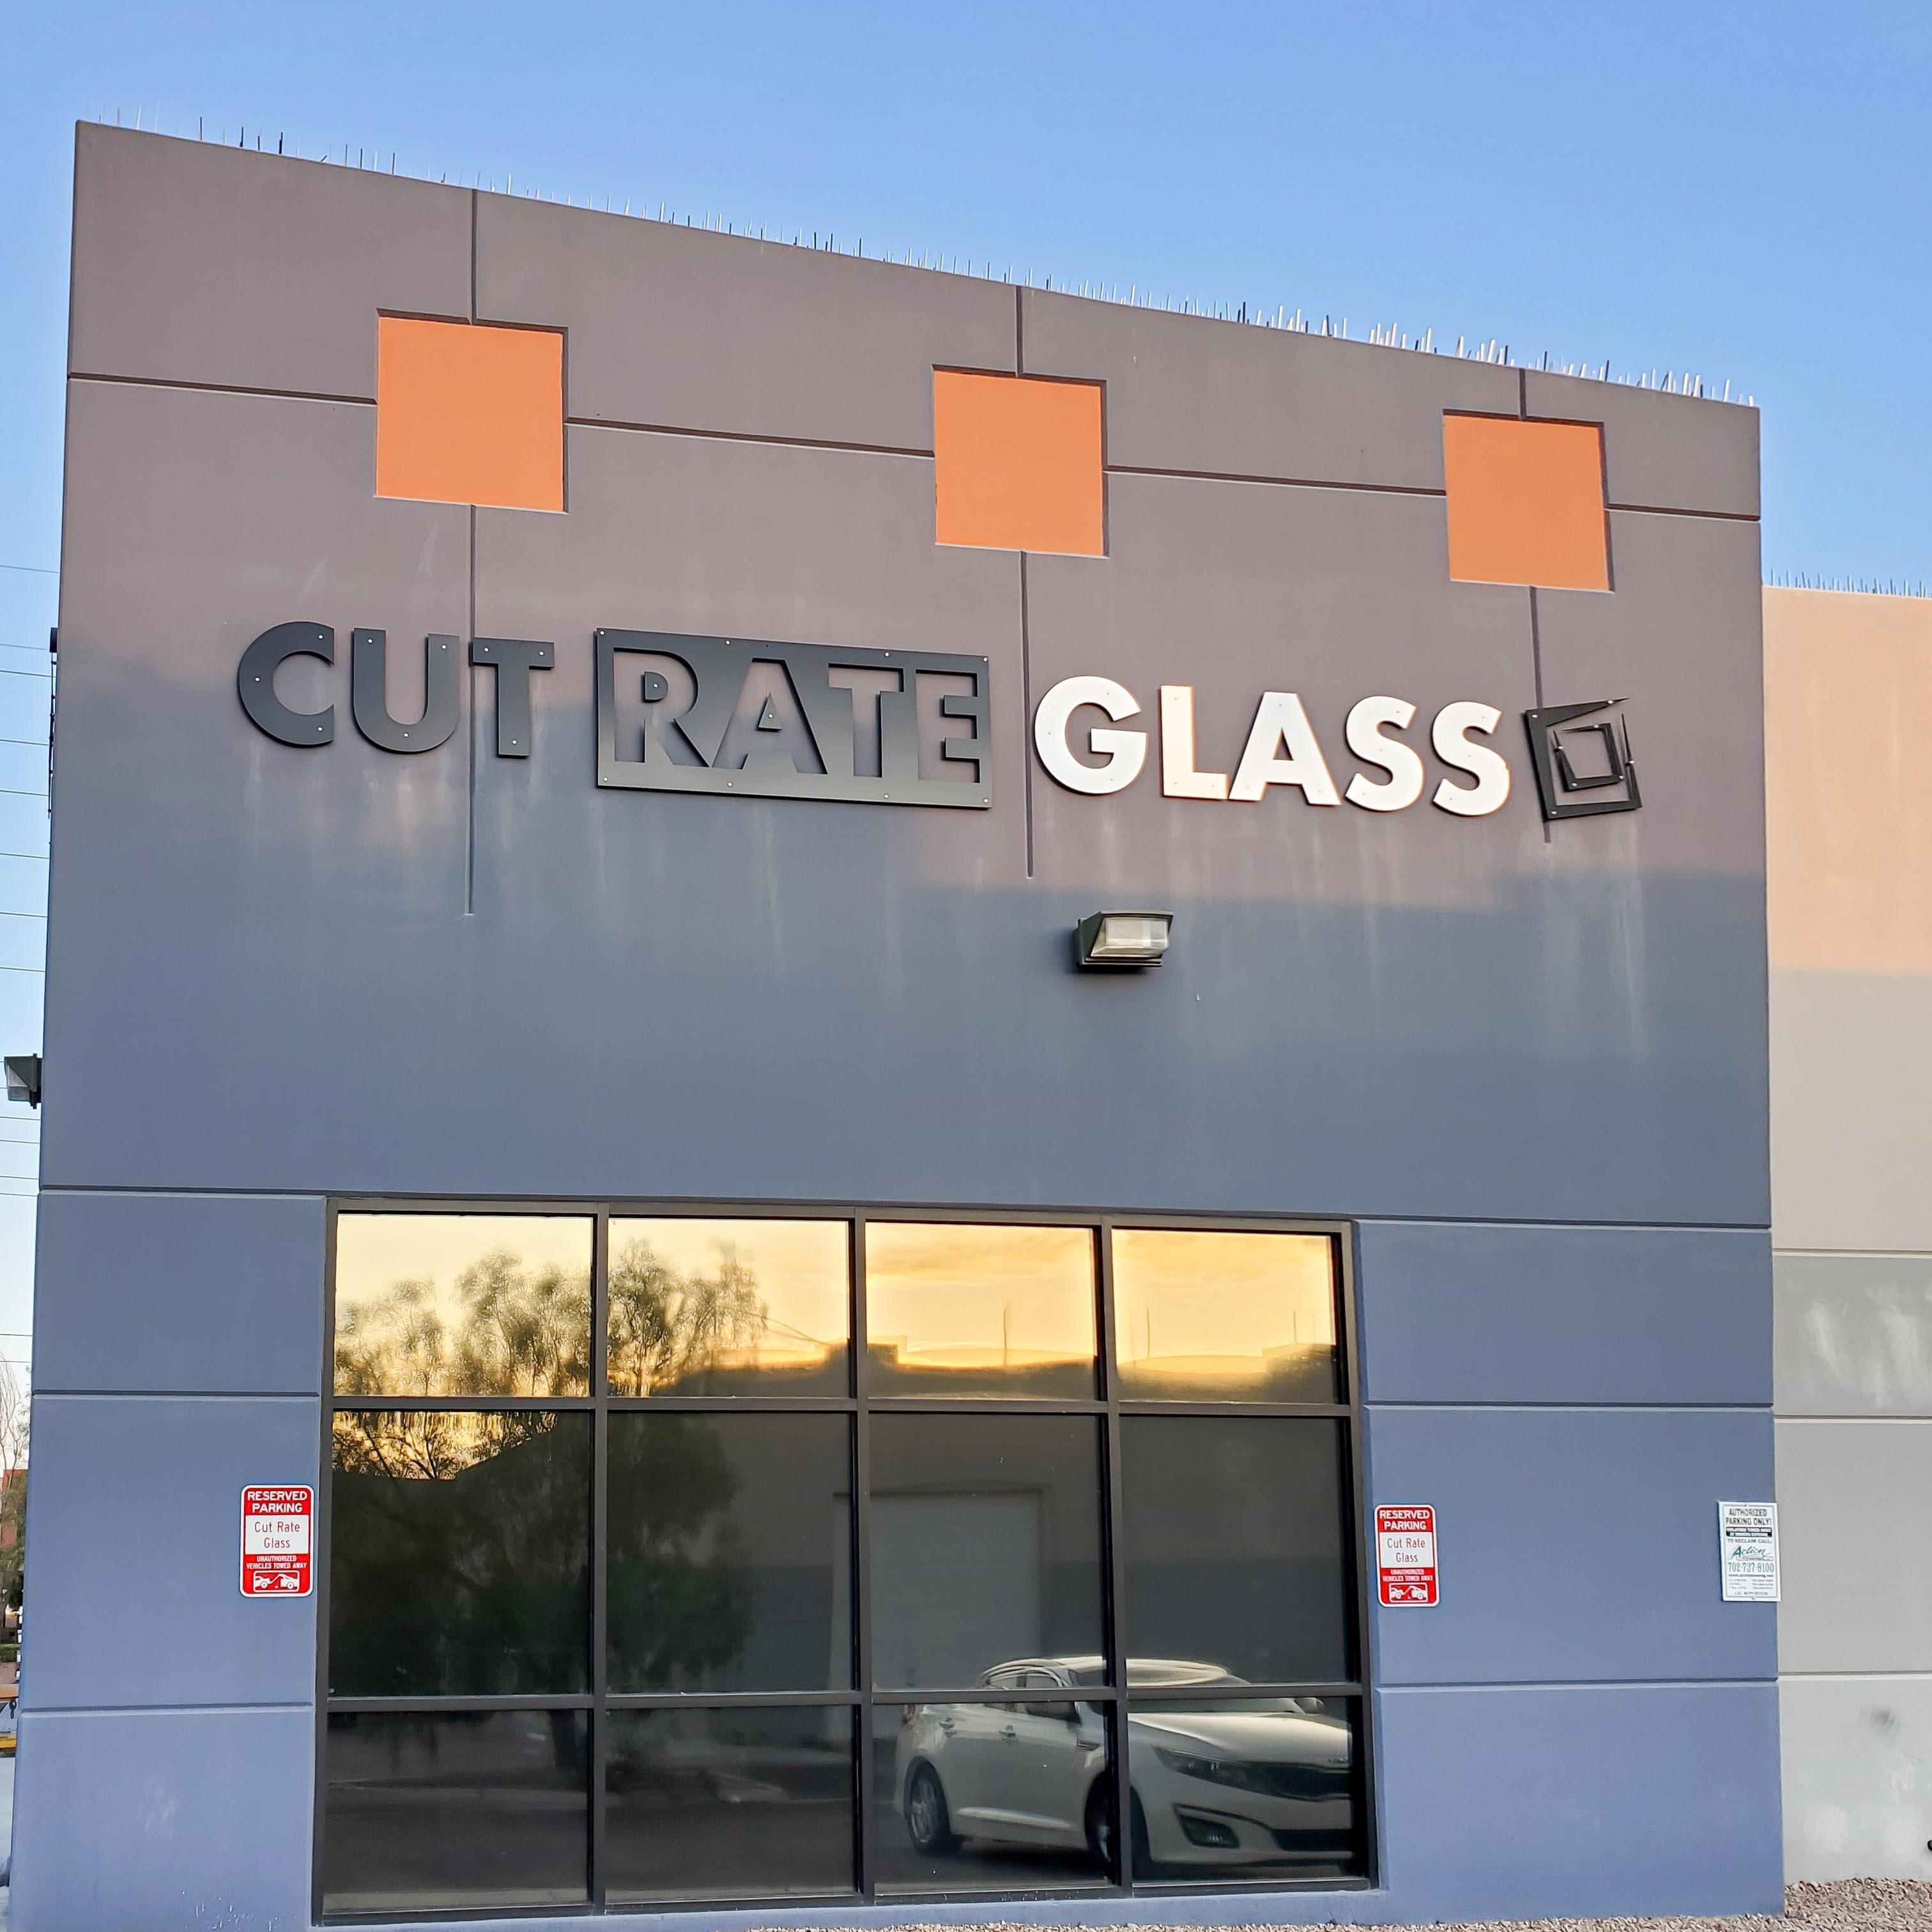 The fastest local glass replacement service located near you in Las Vegas and Henderson, Nevada.